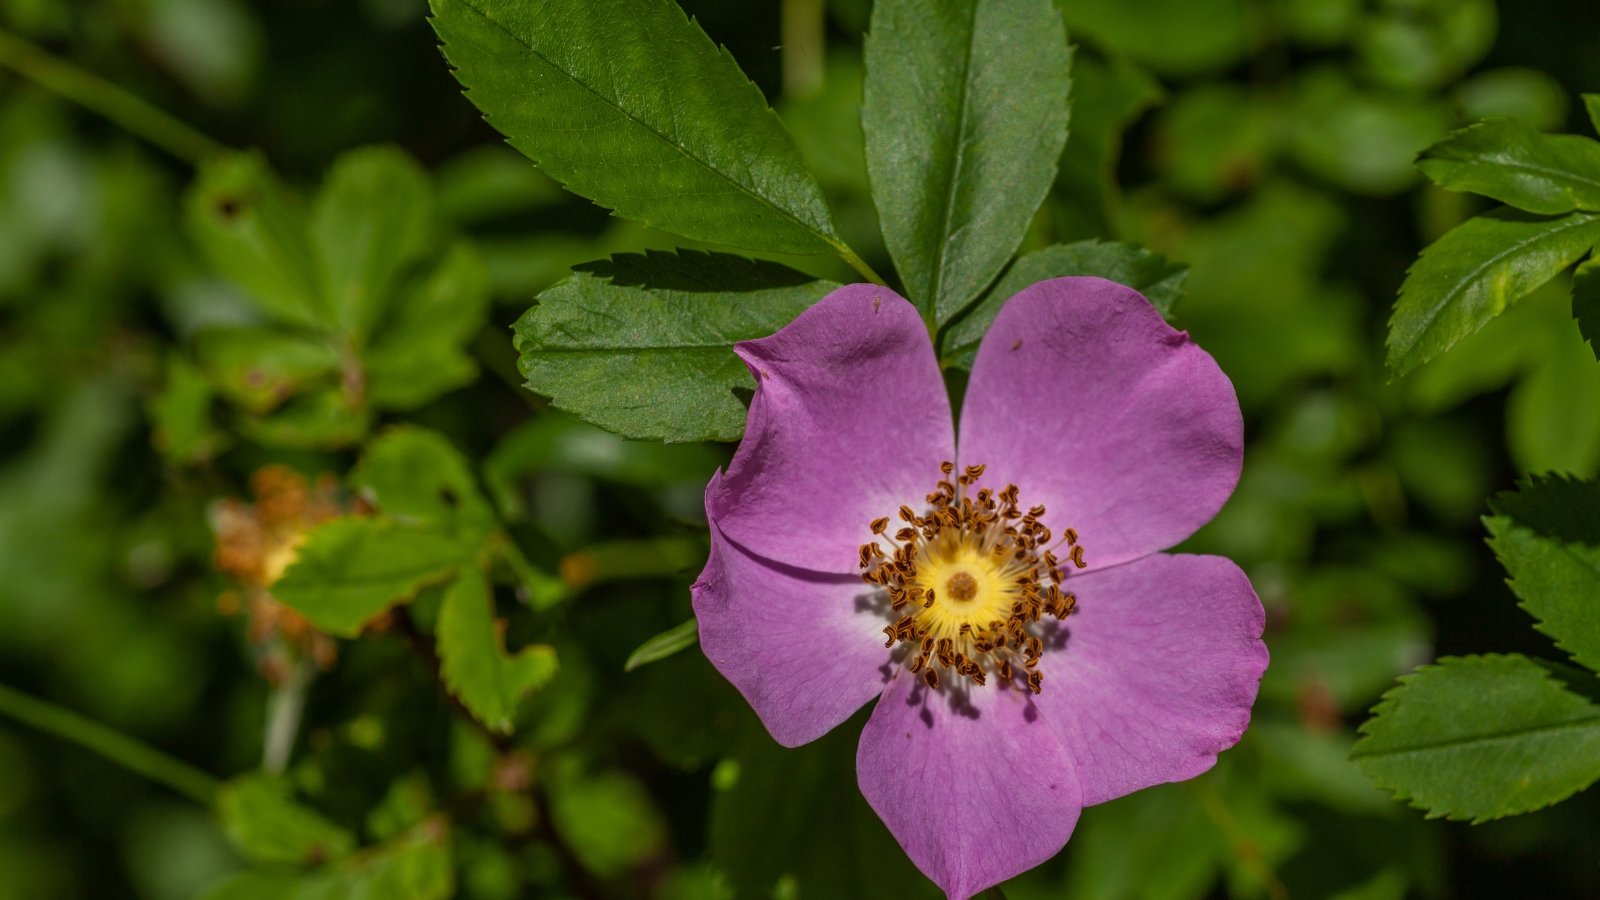 Close-up of a blooming Rosa virginiana which features glossy, dark green, serrated leaves and produces charming pink flowers with five petals and prominent yellow stamens.